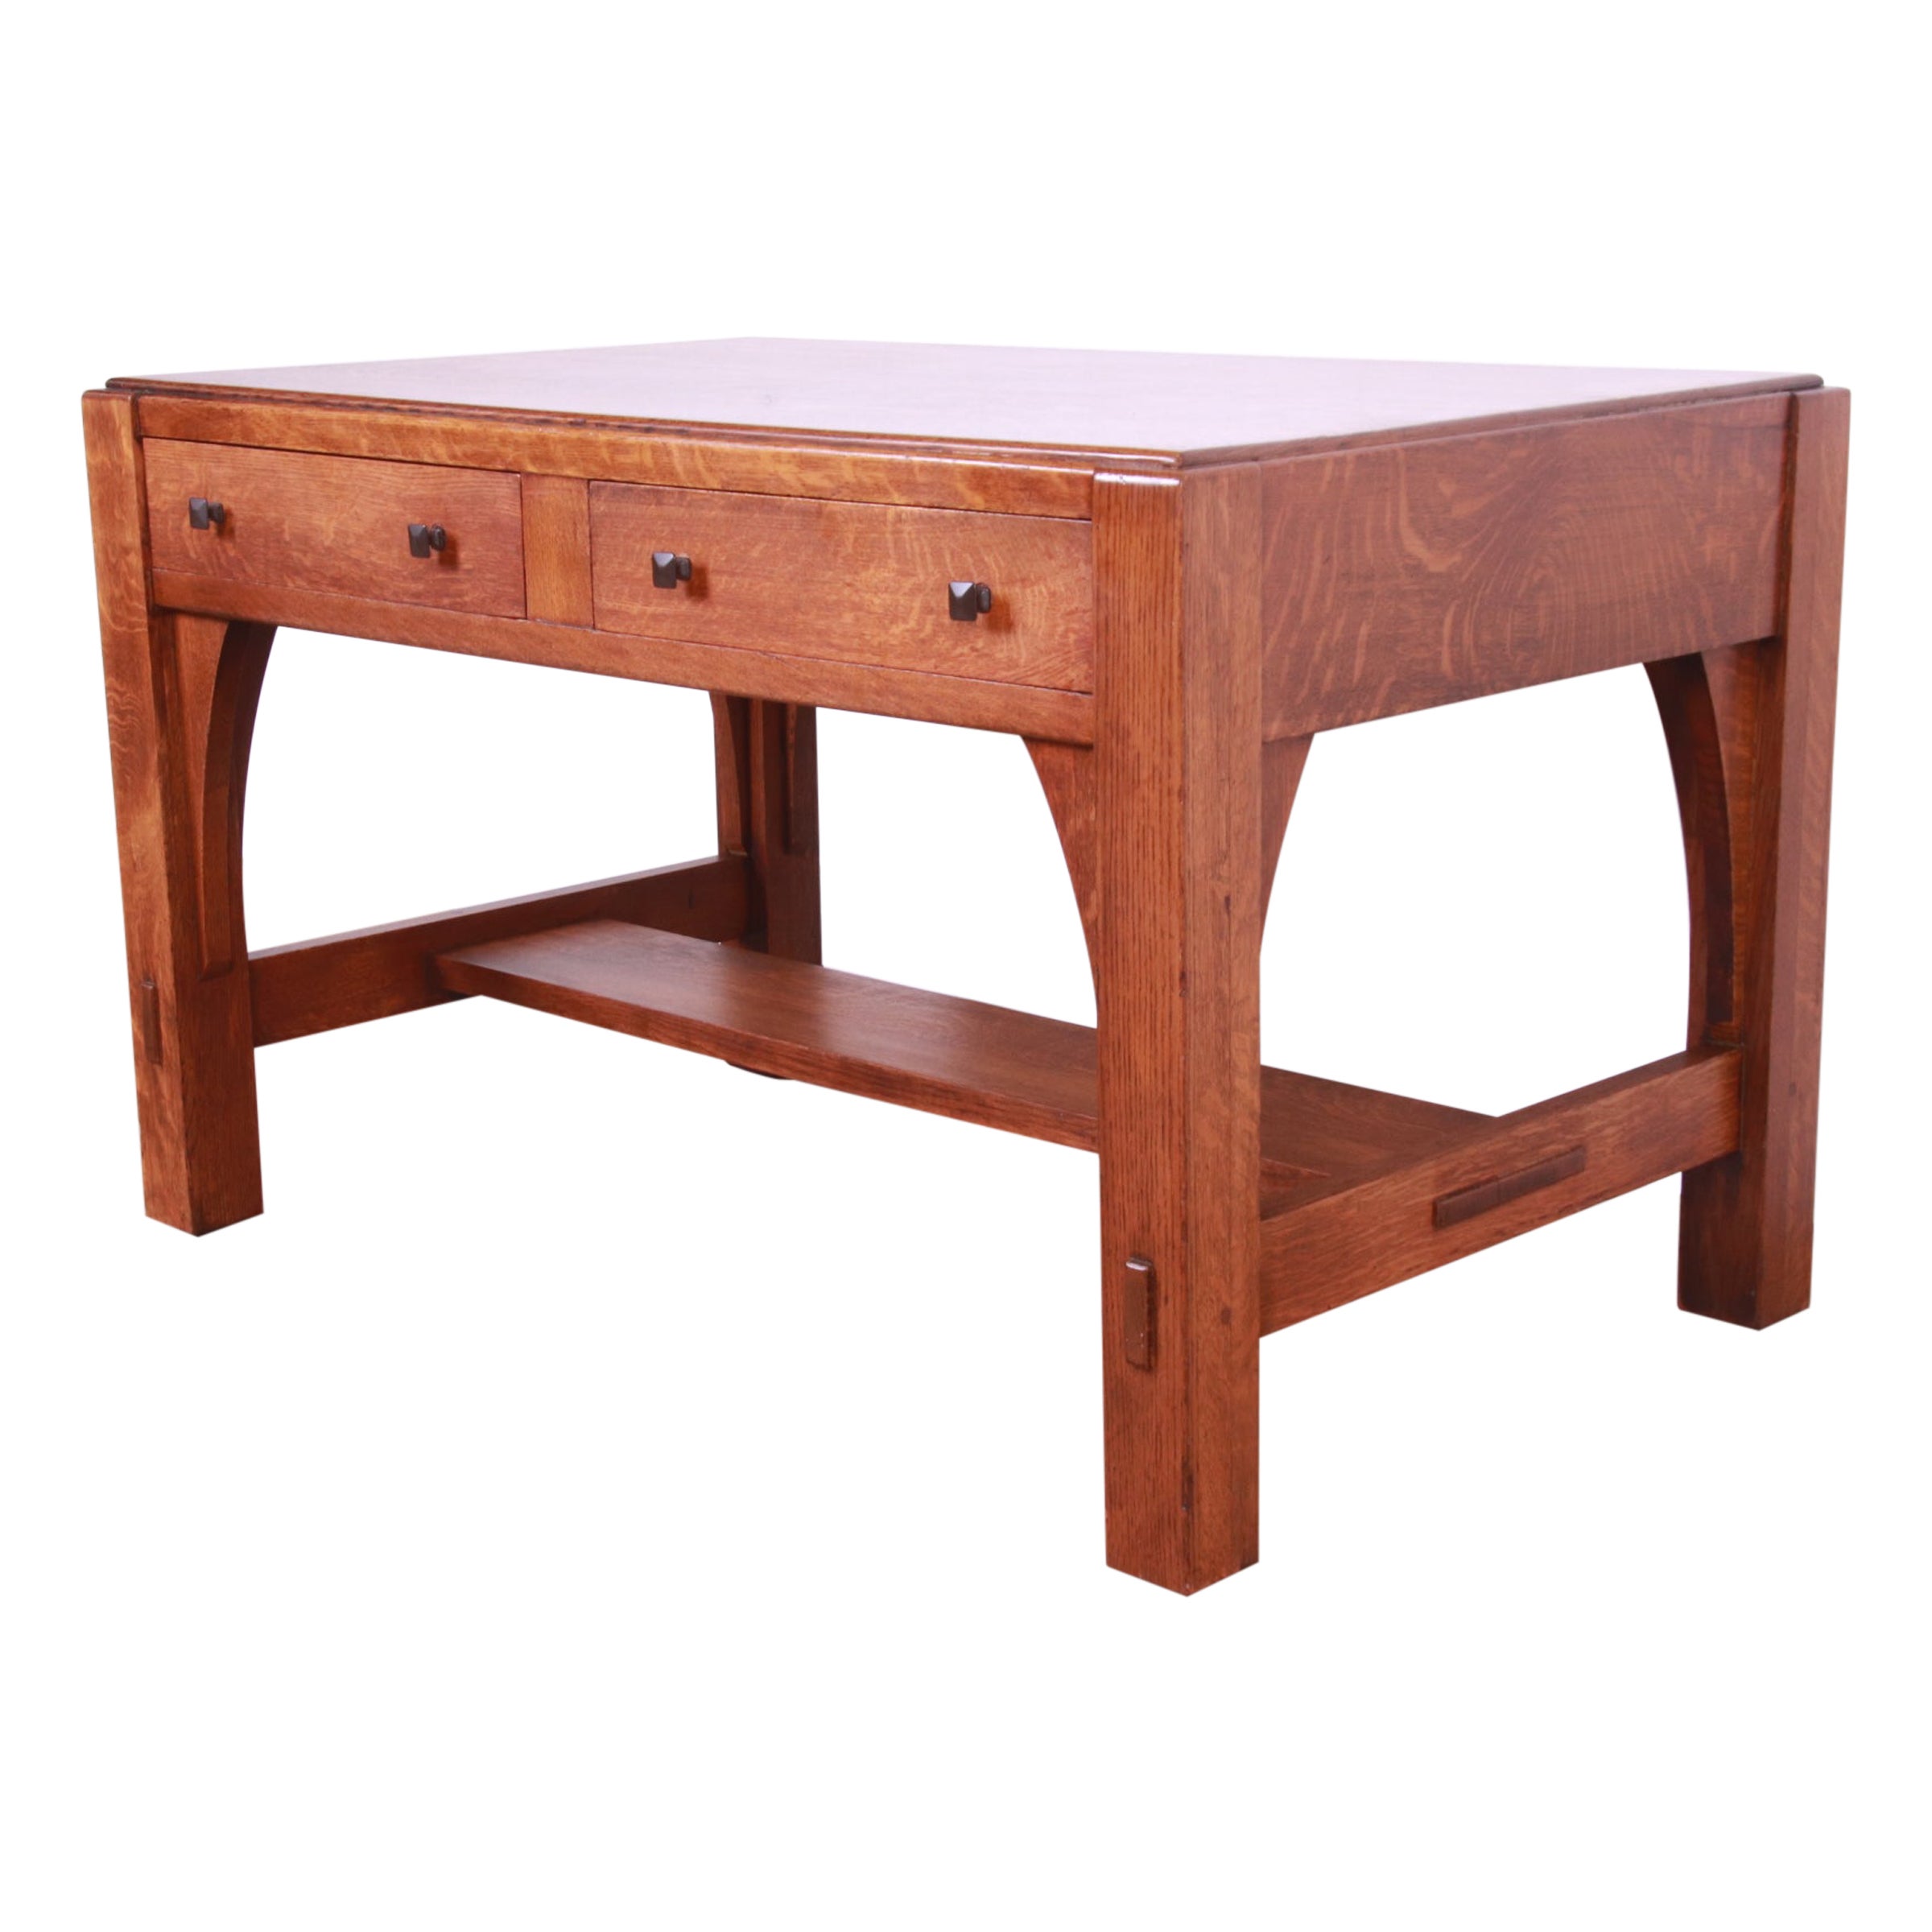 Limbert Mission Oak Arts & Crafts Desk or Library Table, Circa 1900